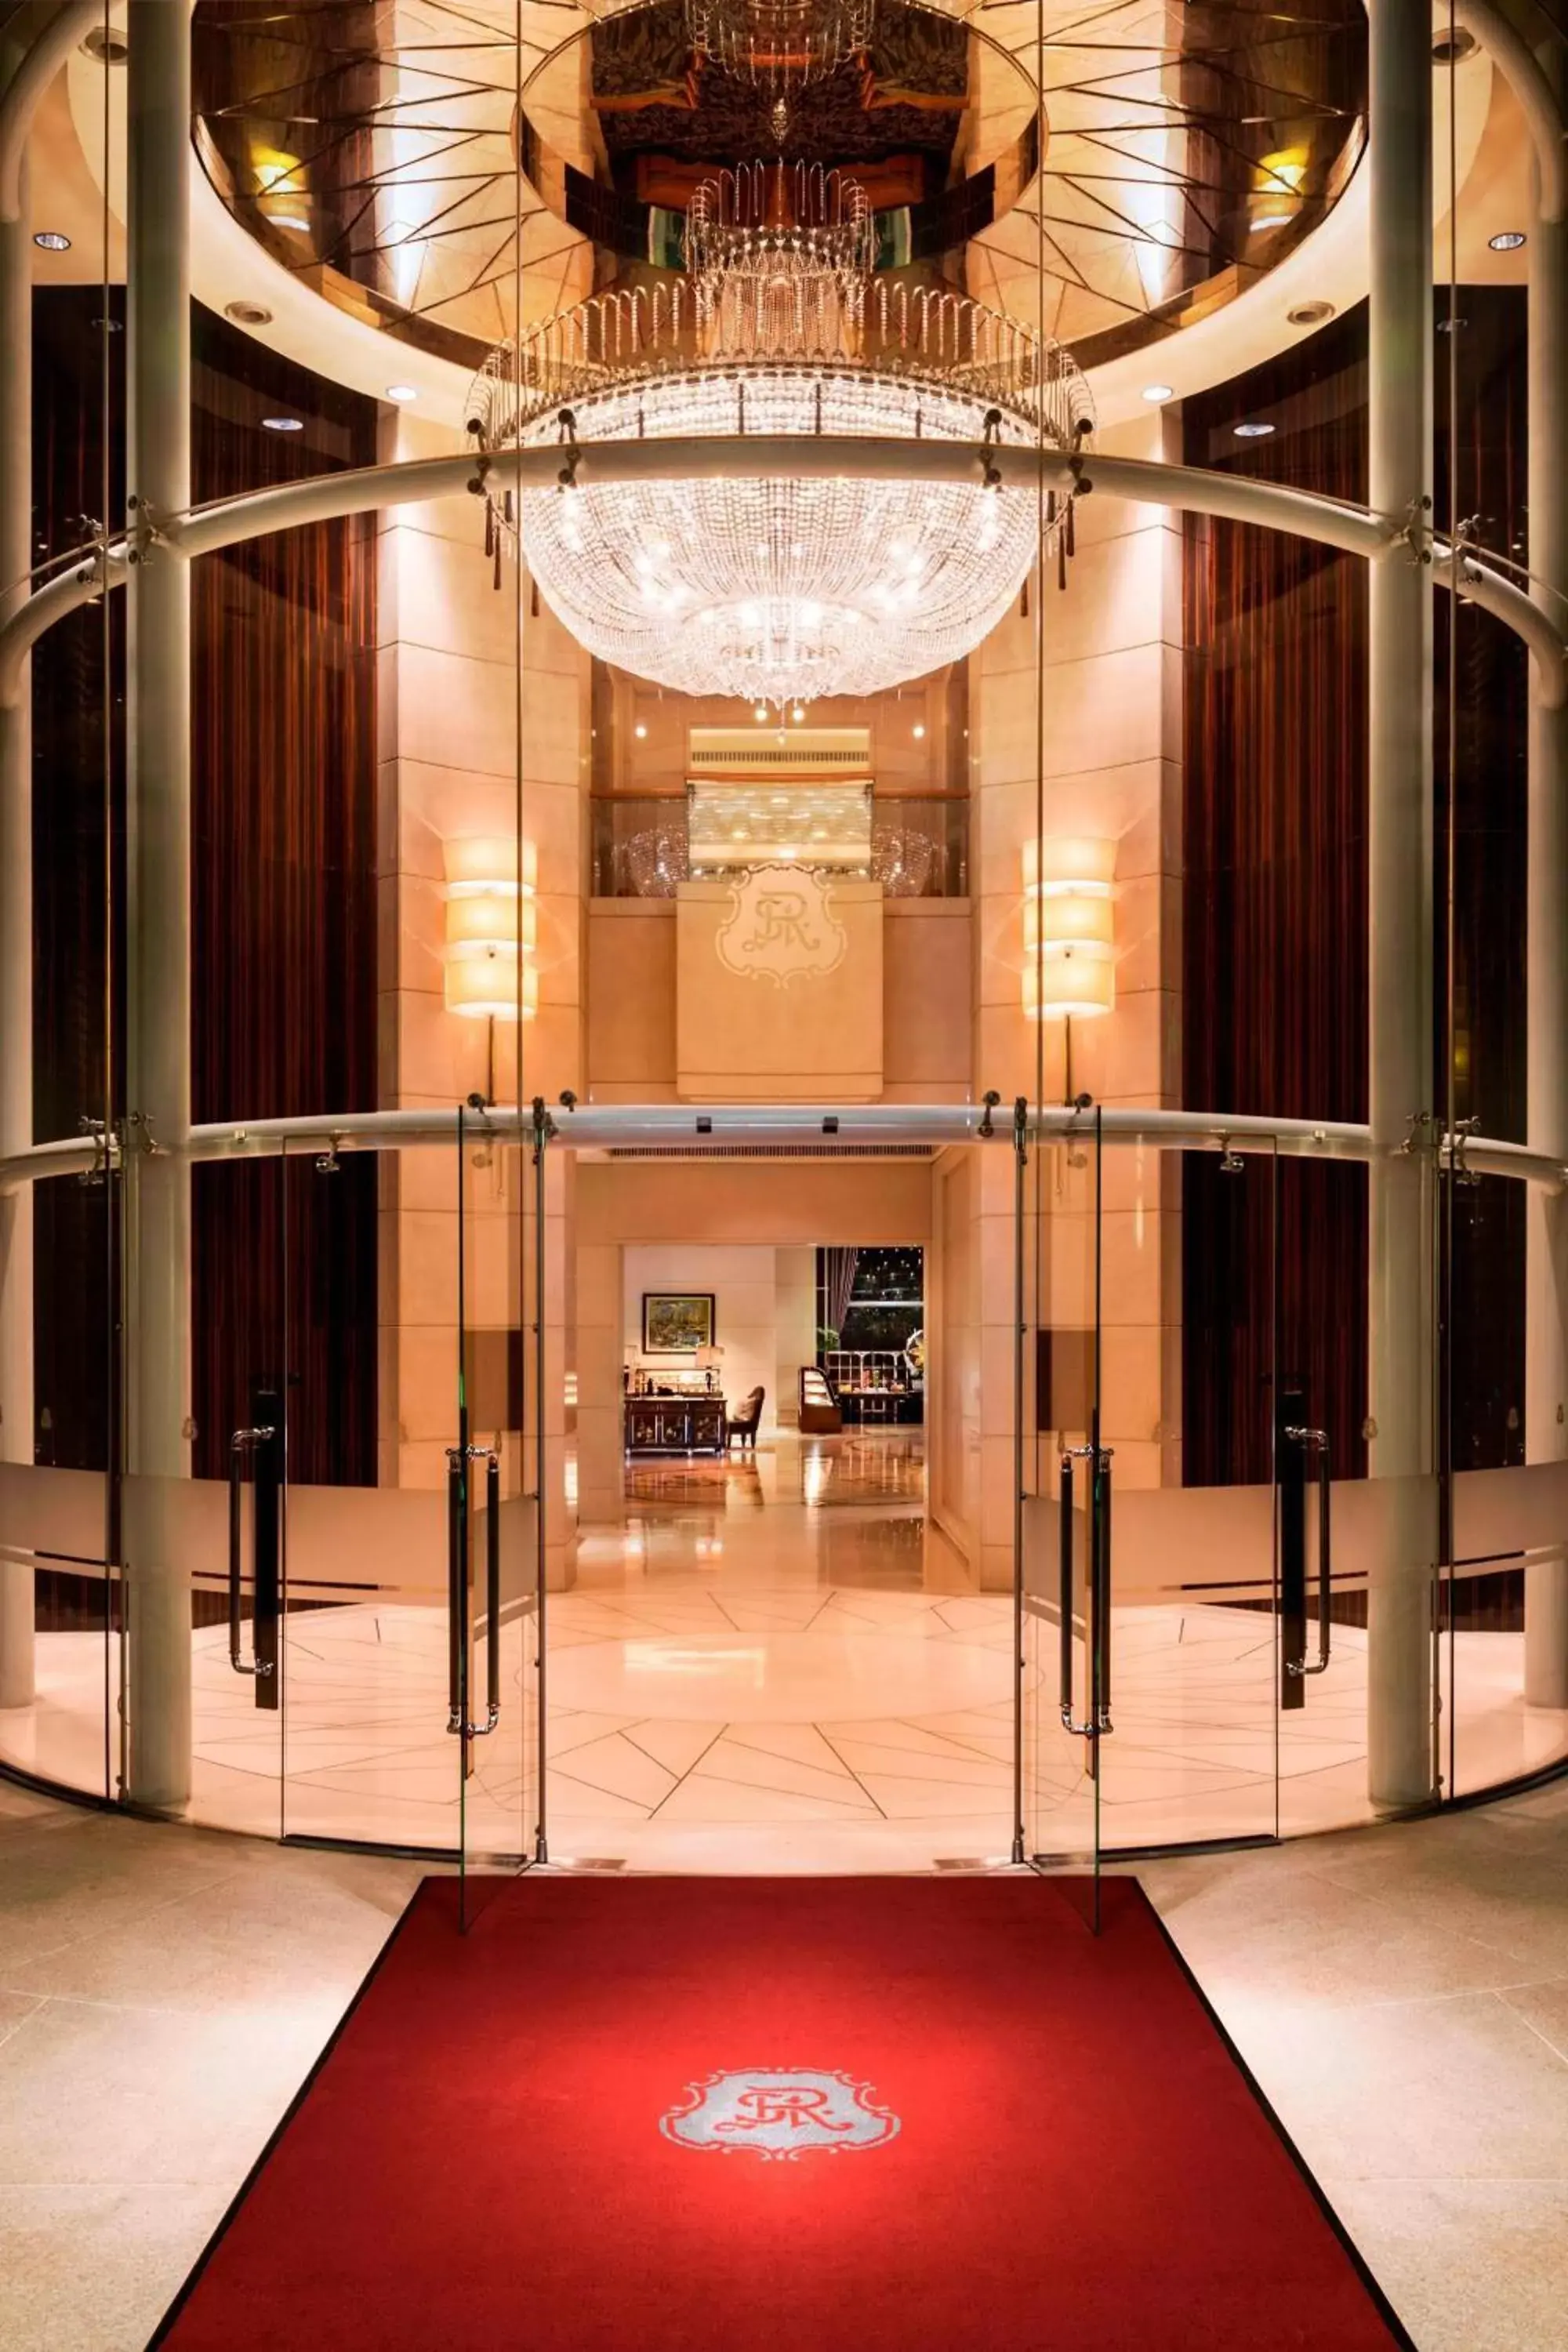 Property building in The St Regis Singapore